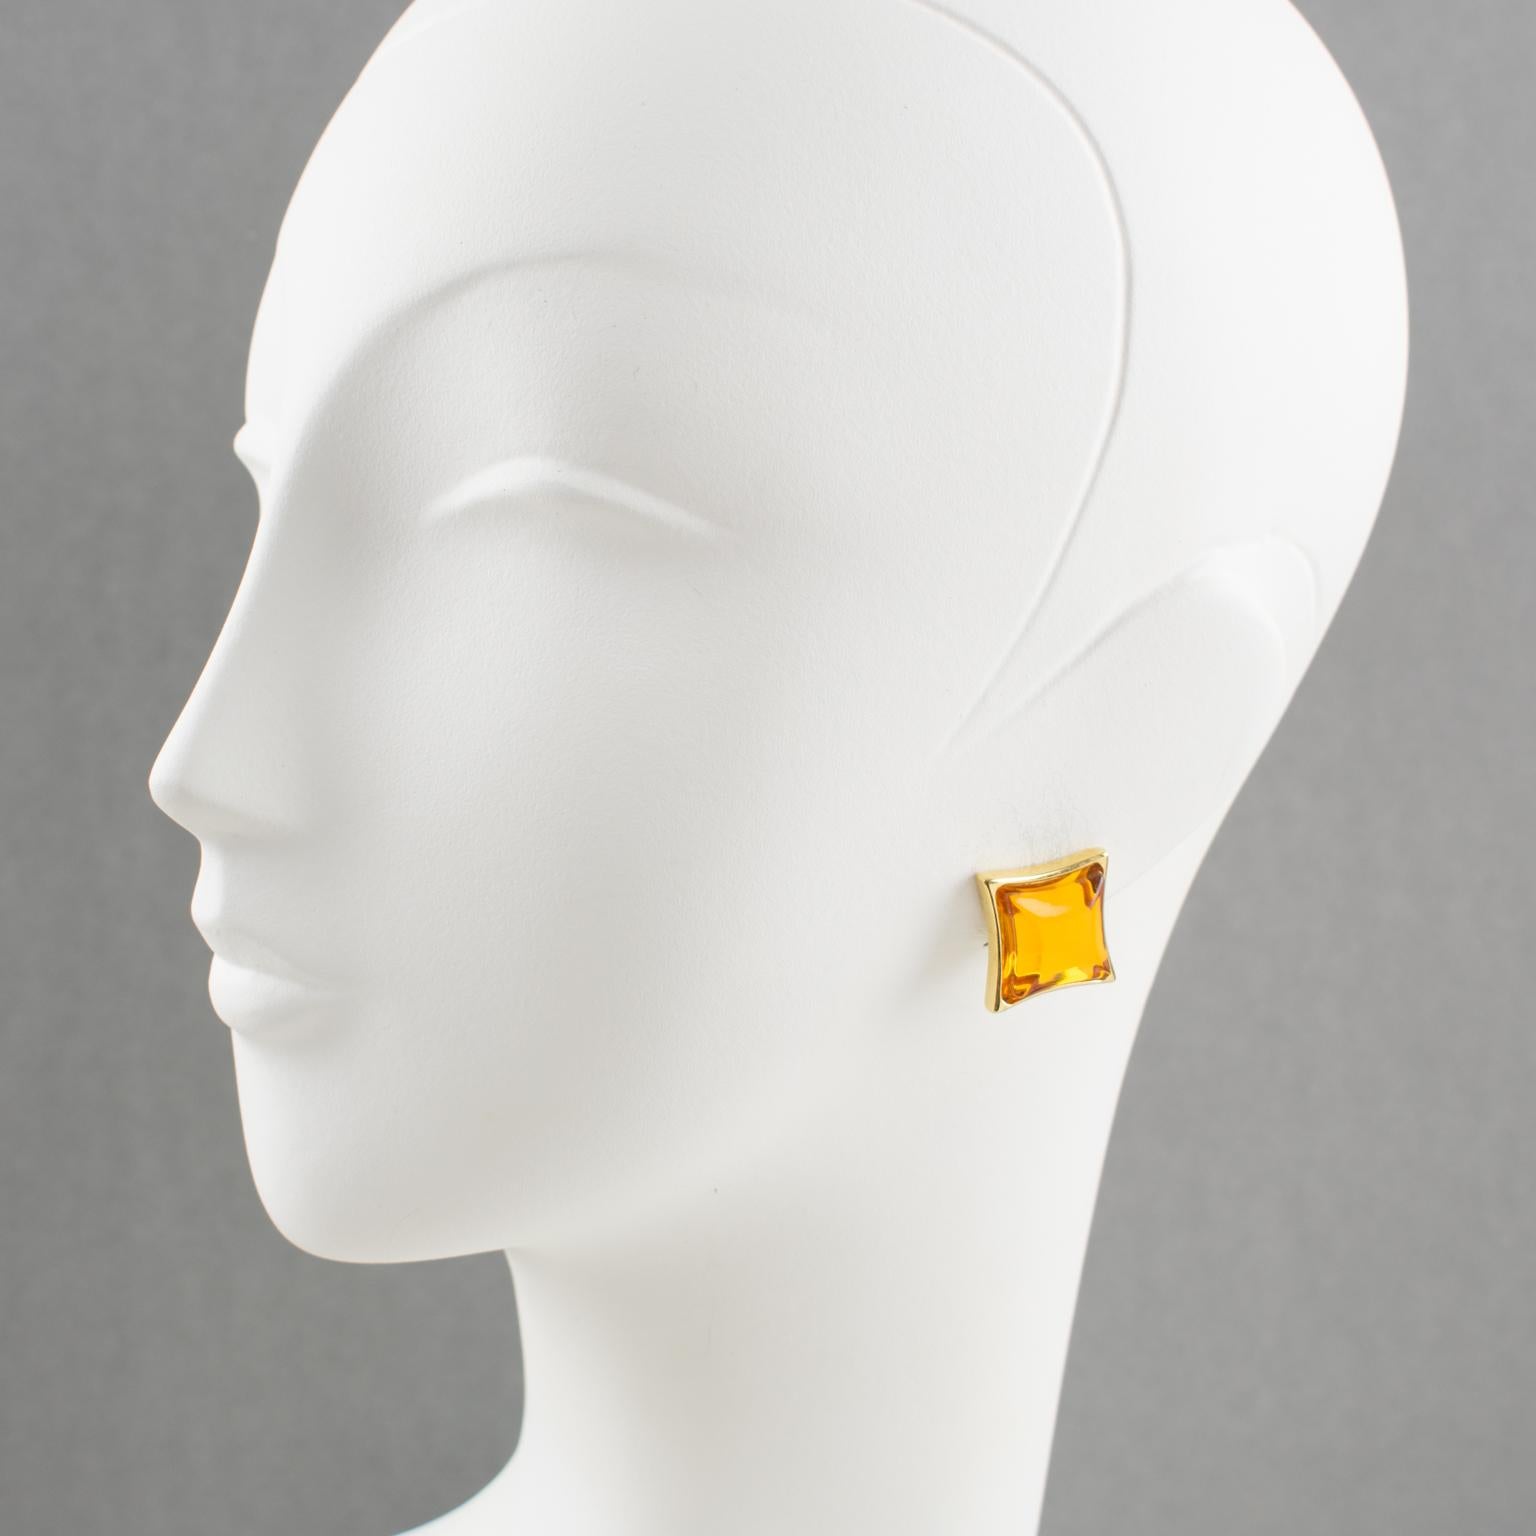 Elegant Yves Saint Laurent YSL Paris signed clip on earrings. Modernist square shape, shiny gilt metal frame topped with domed poured glass cabochon in translucent honey color. Signed at the back with YSL pierced logo on clip and engraved underside: